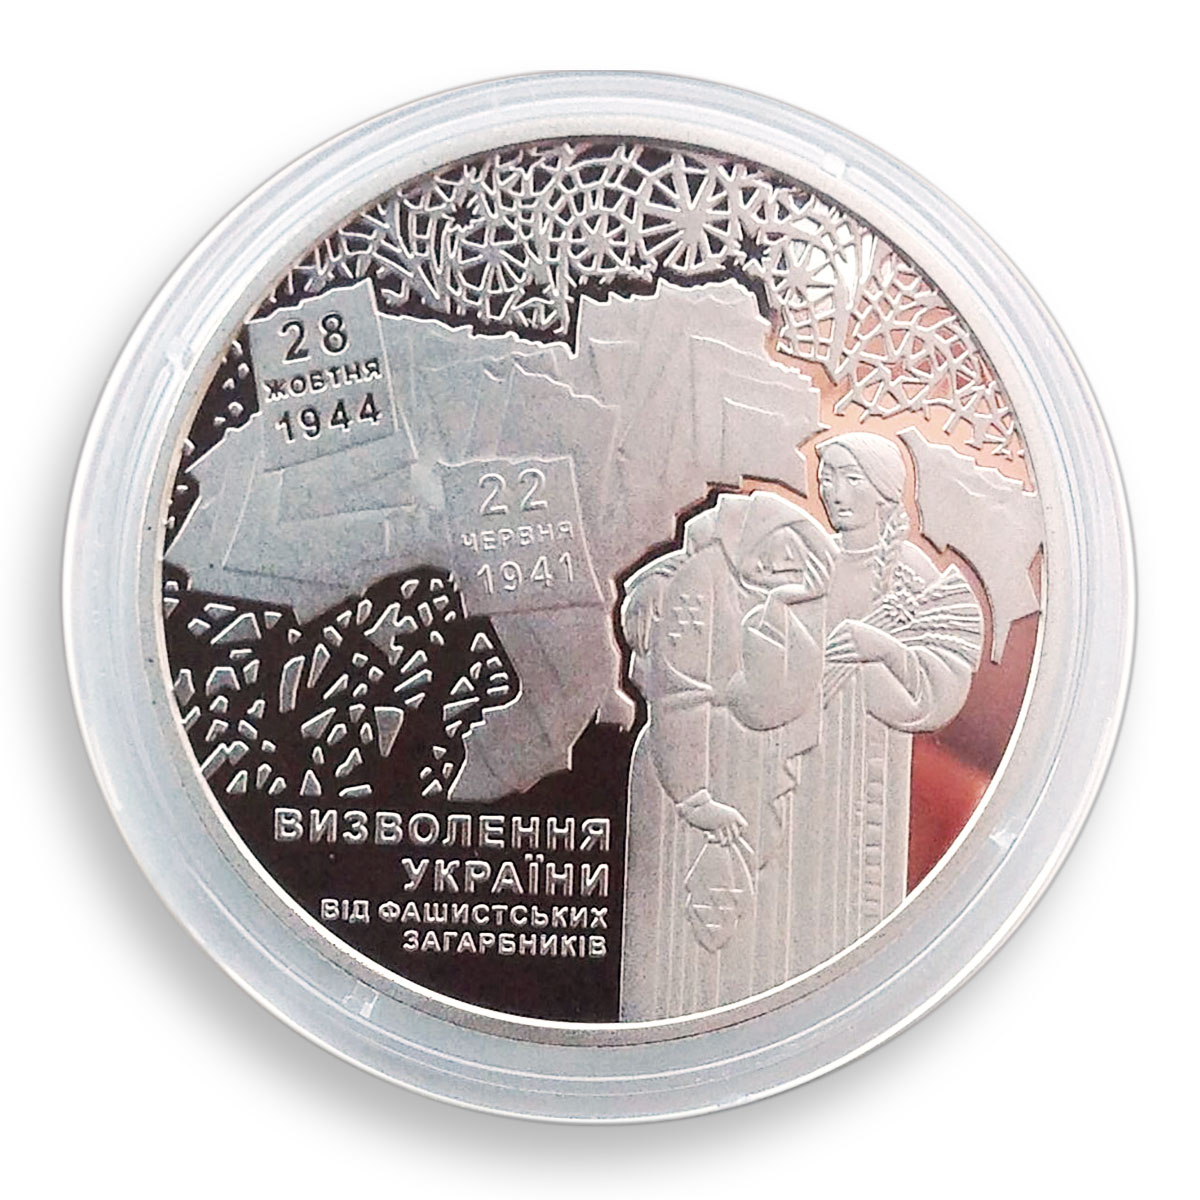 Ukraine 5 hryvnia 70 years Liberation from fascists poppy color nickel coin 2014